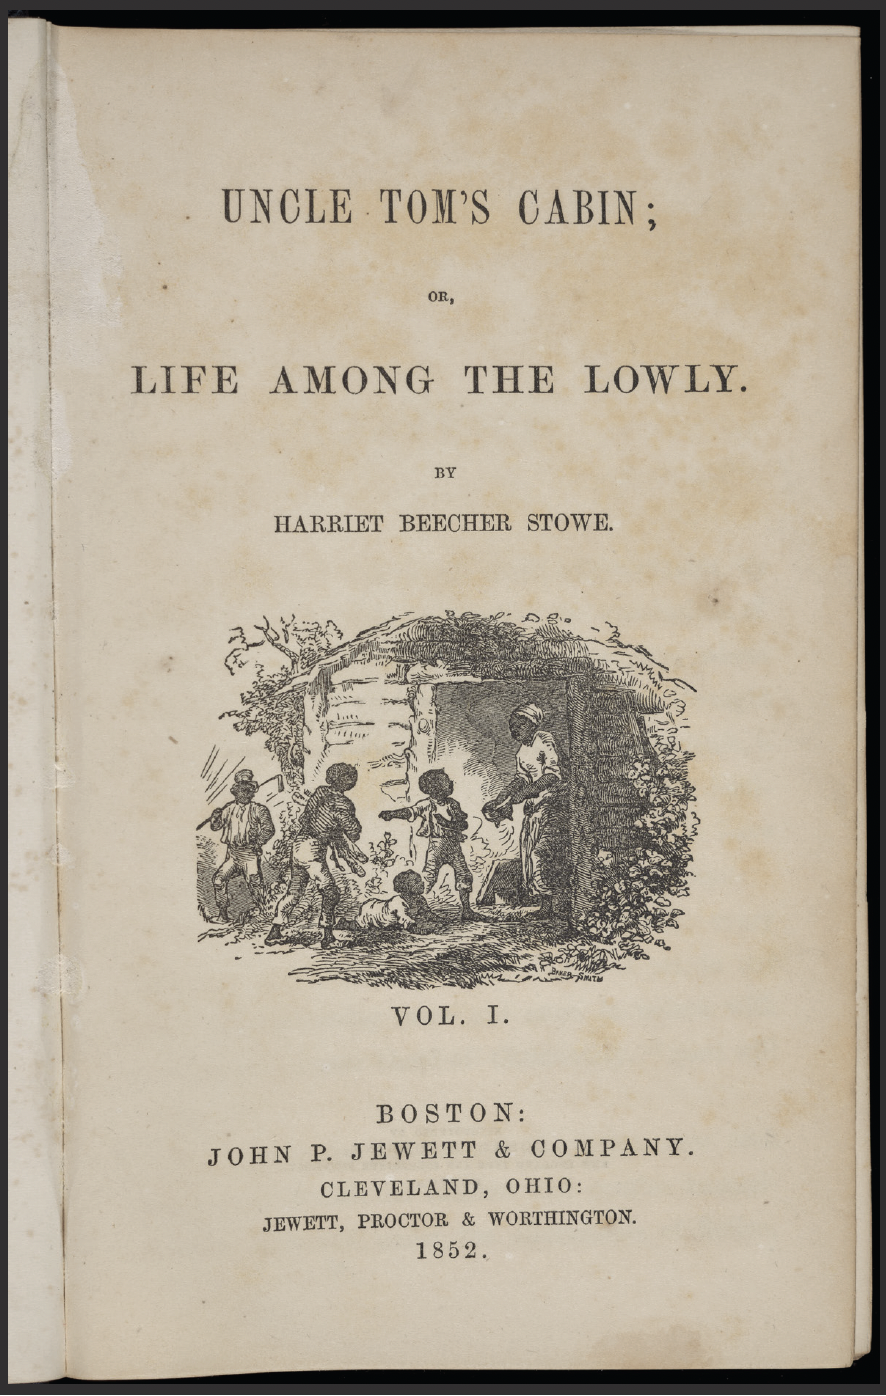 Title page of Harriet Beecher Stowe's “Uncle Tom’s Cabin; or, Life Among the Lowly.”